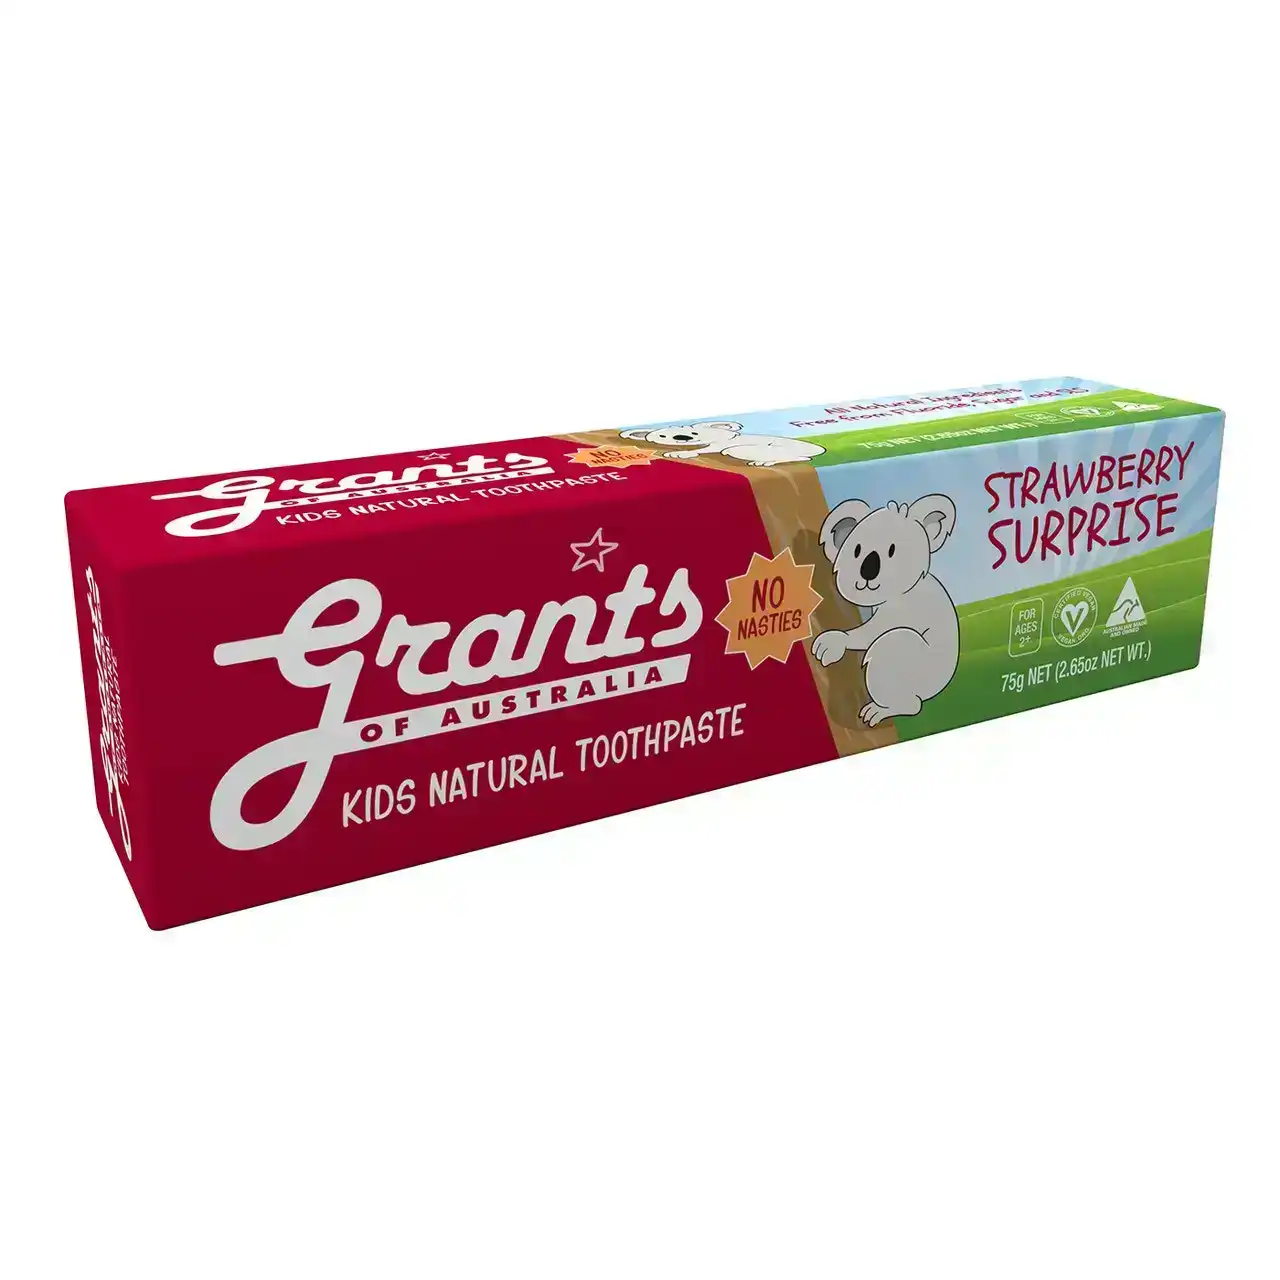 Grant's Kids Natural Toothpaste Strawberry Surprise 75g